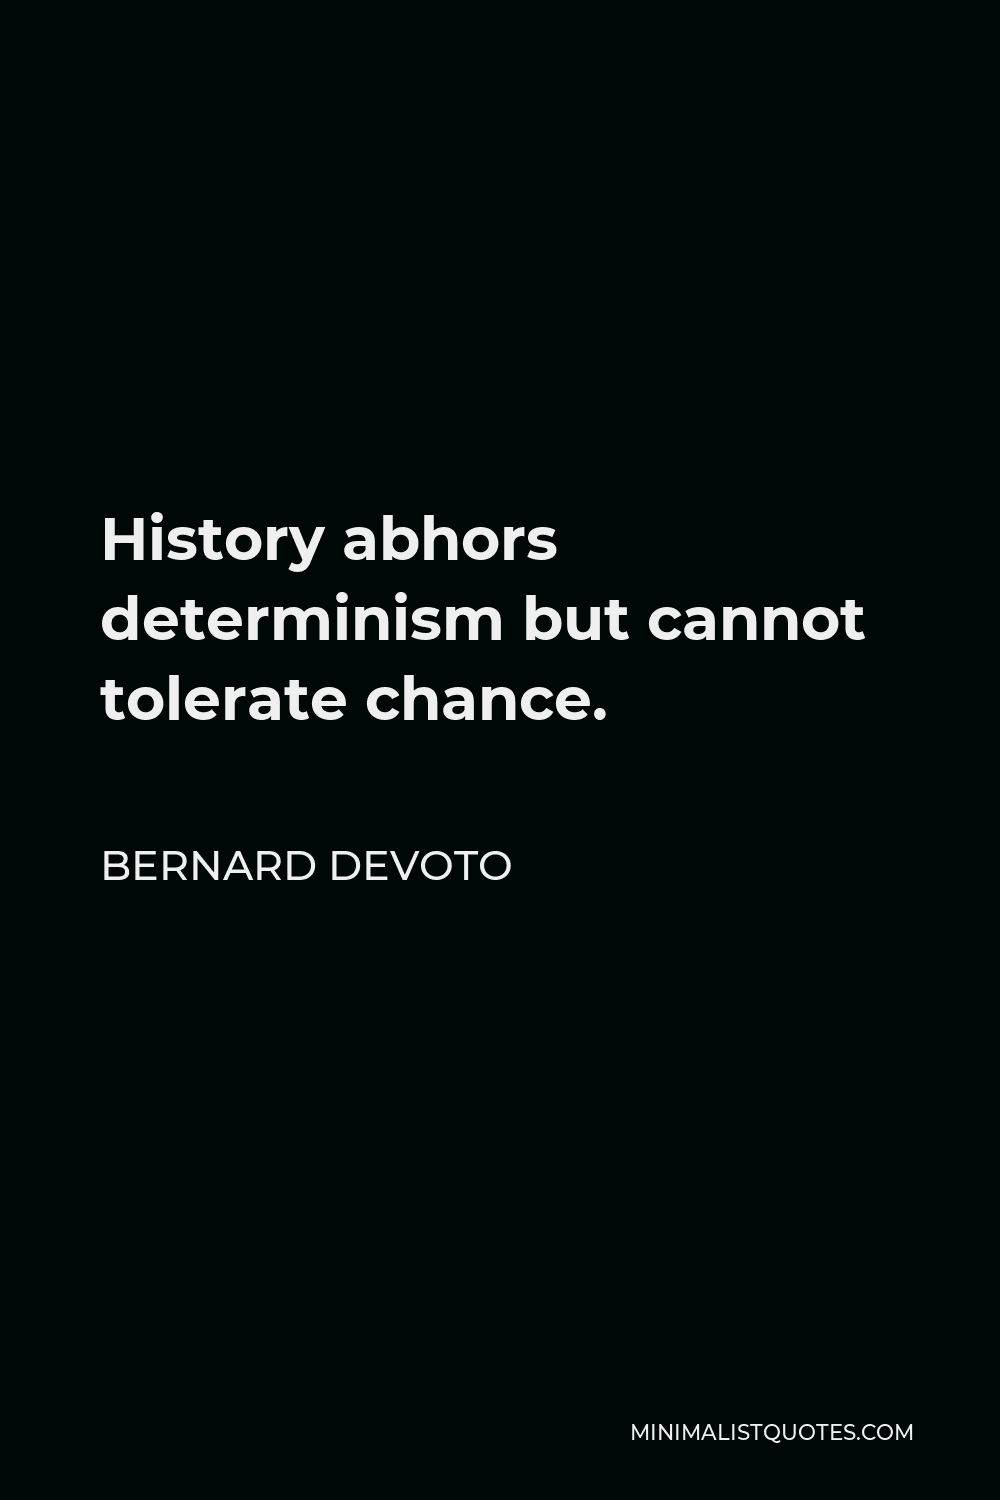 Bernard DeVoto Quote - History abhors determinism but cannot tolerate chance.